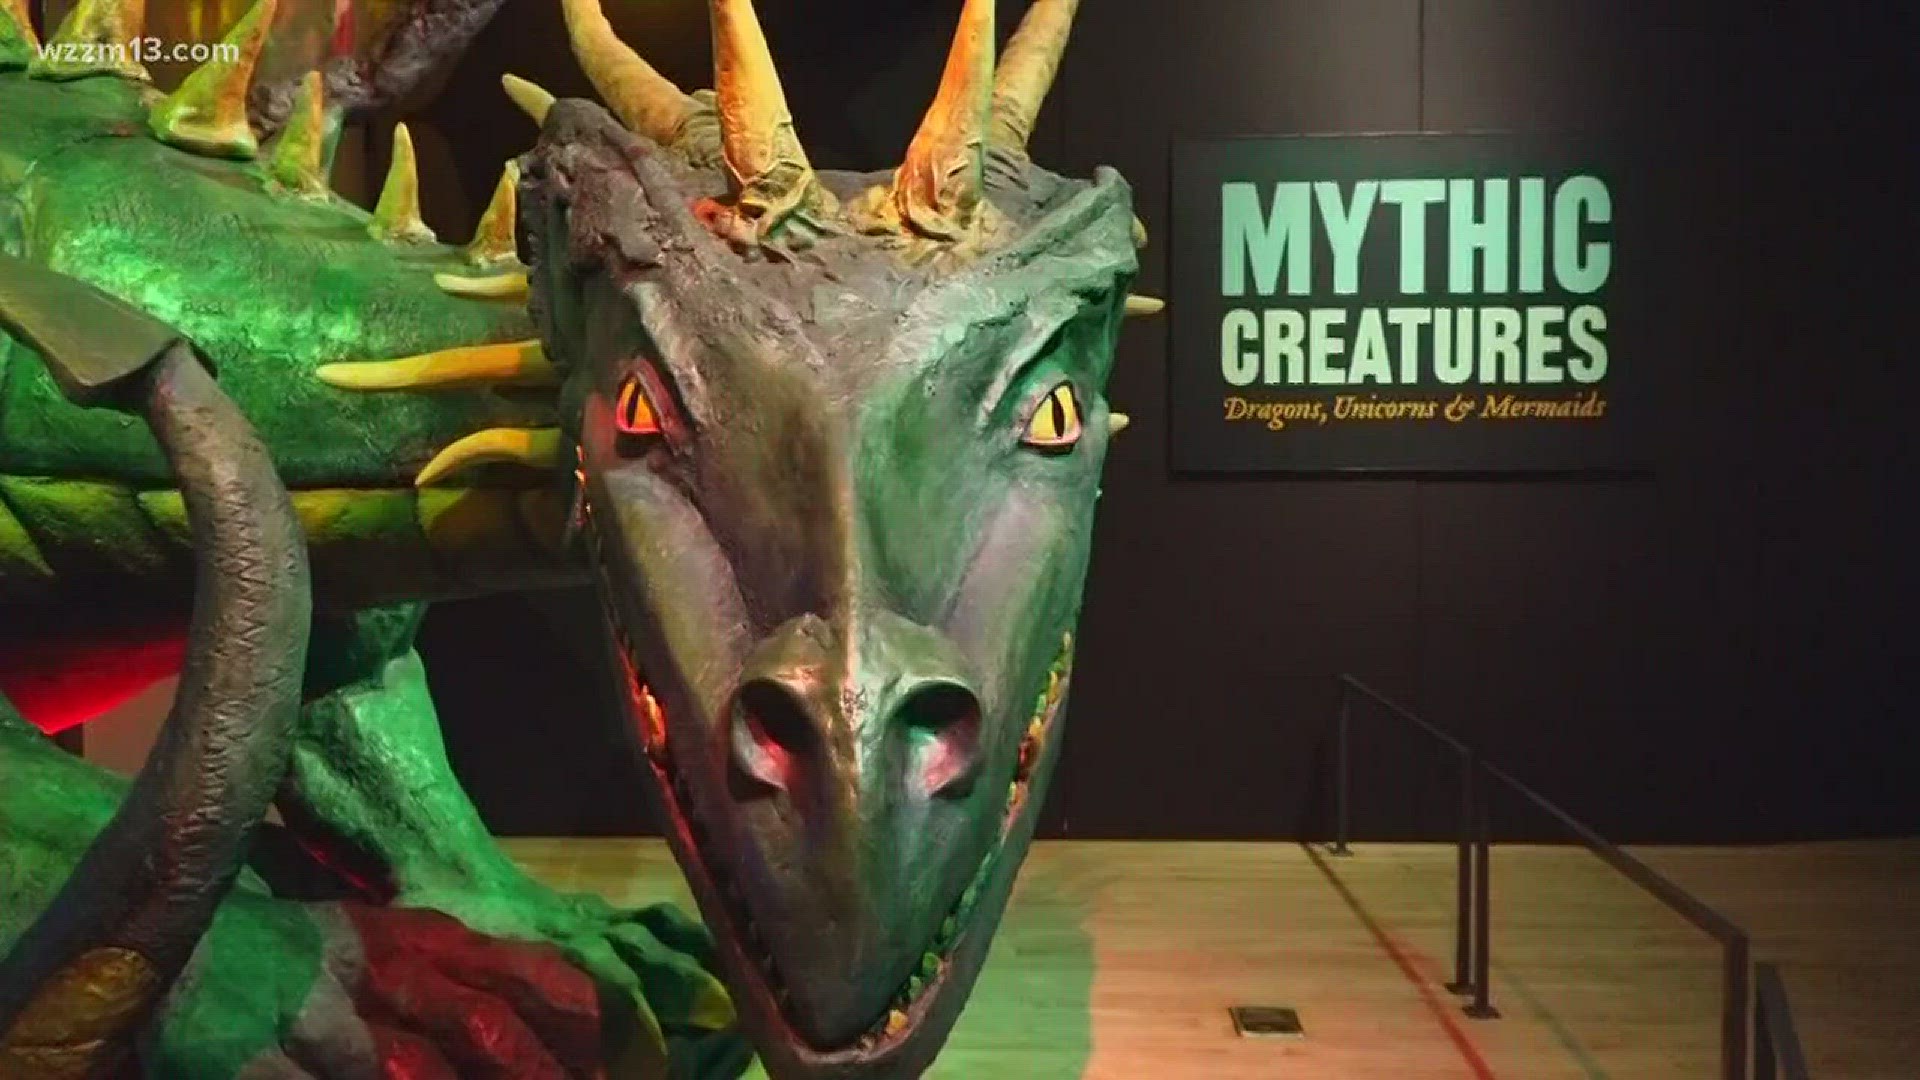 Mythical Creatures In Grand Rapids Grpm Welcomes Dragons Unicorns